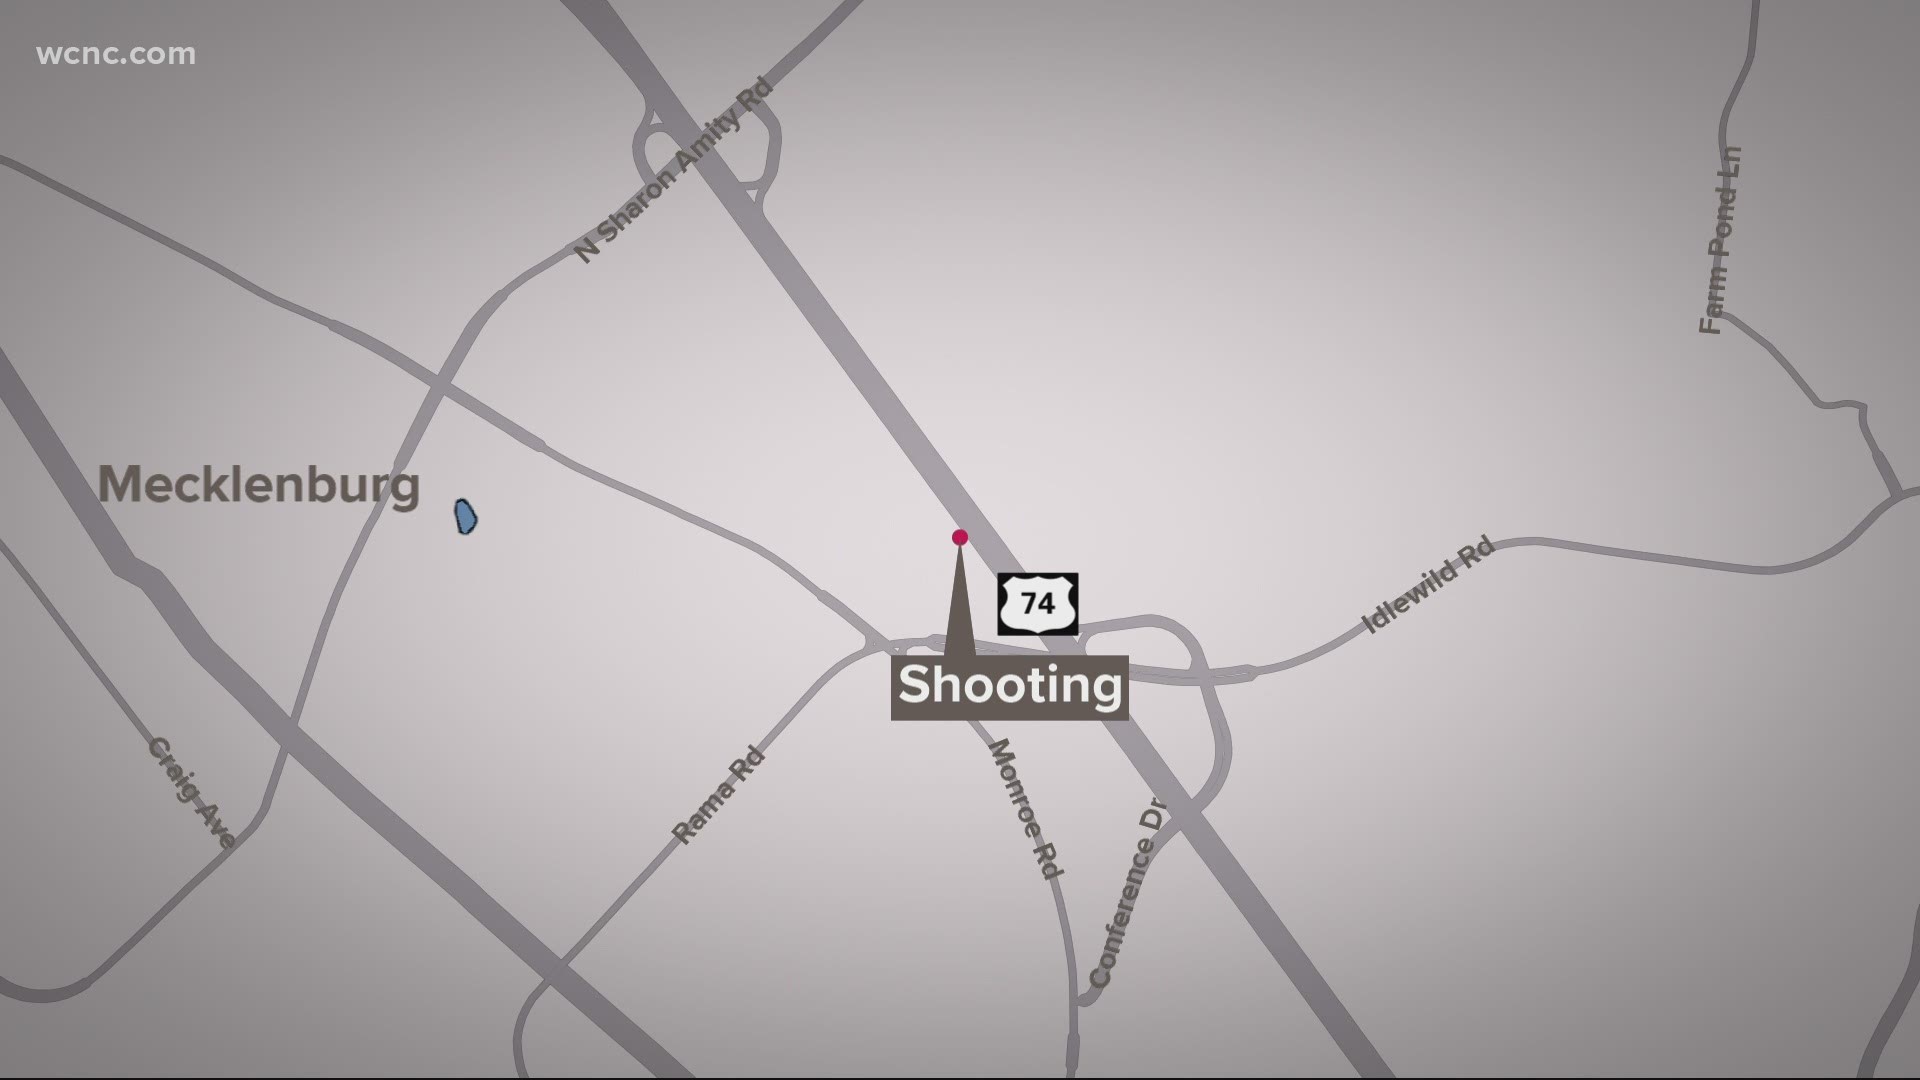 The department said it responded to reports of a shooting along East Independence Boulevard near Idlewild Road around 2:20 a.m. Sunday.